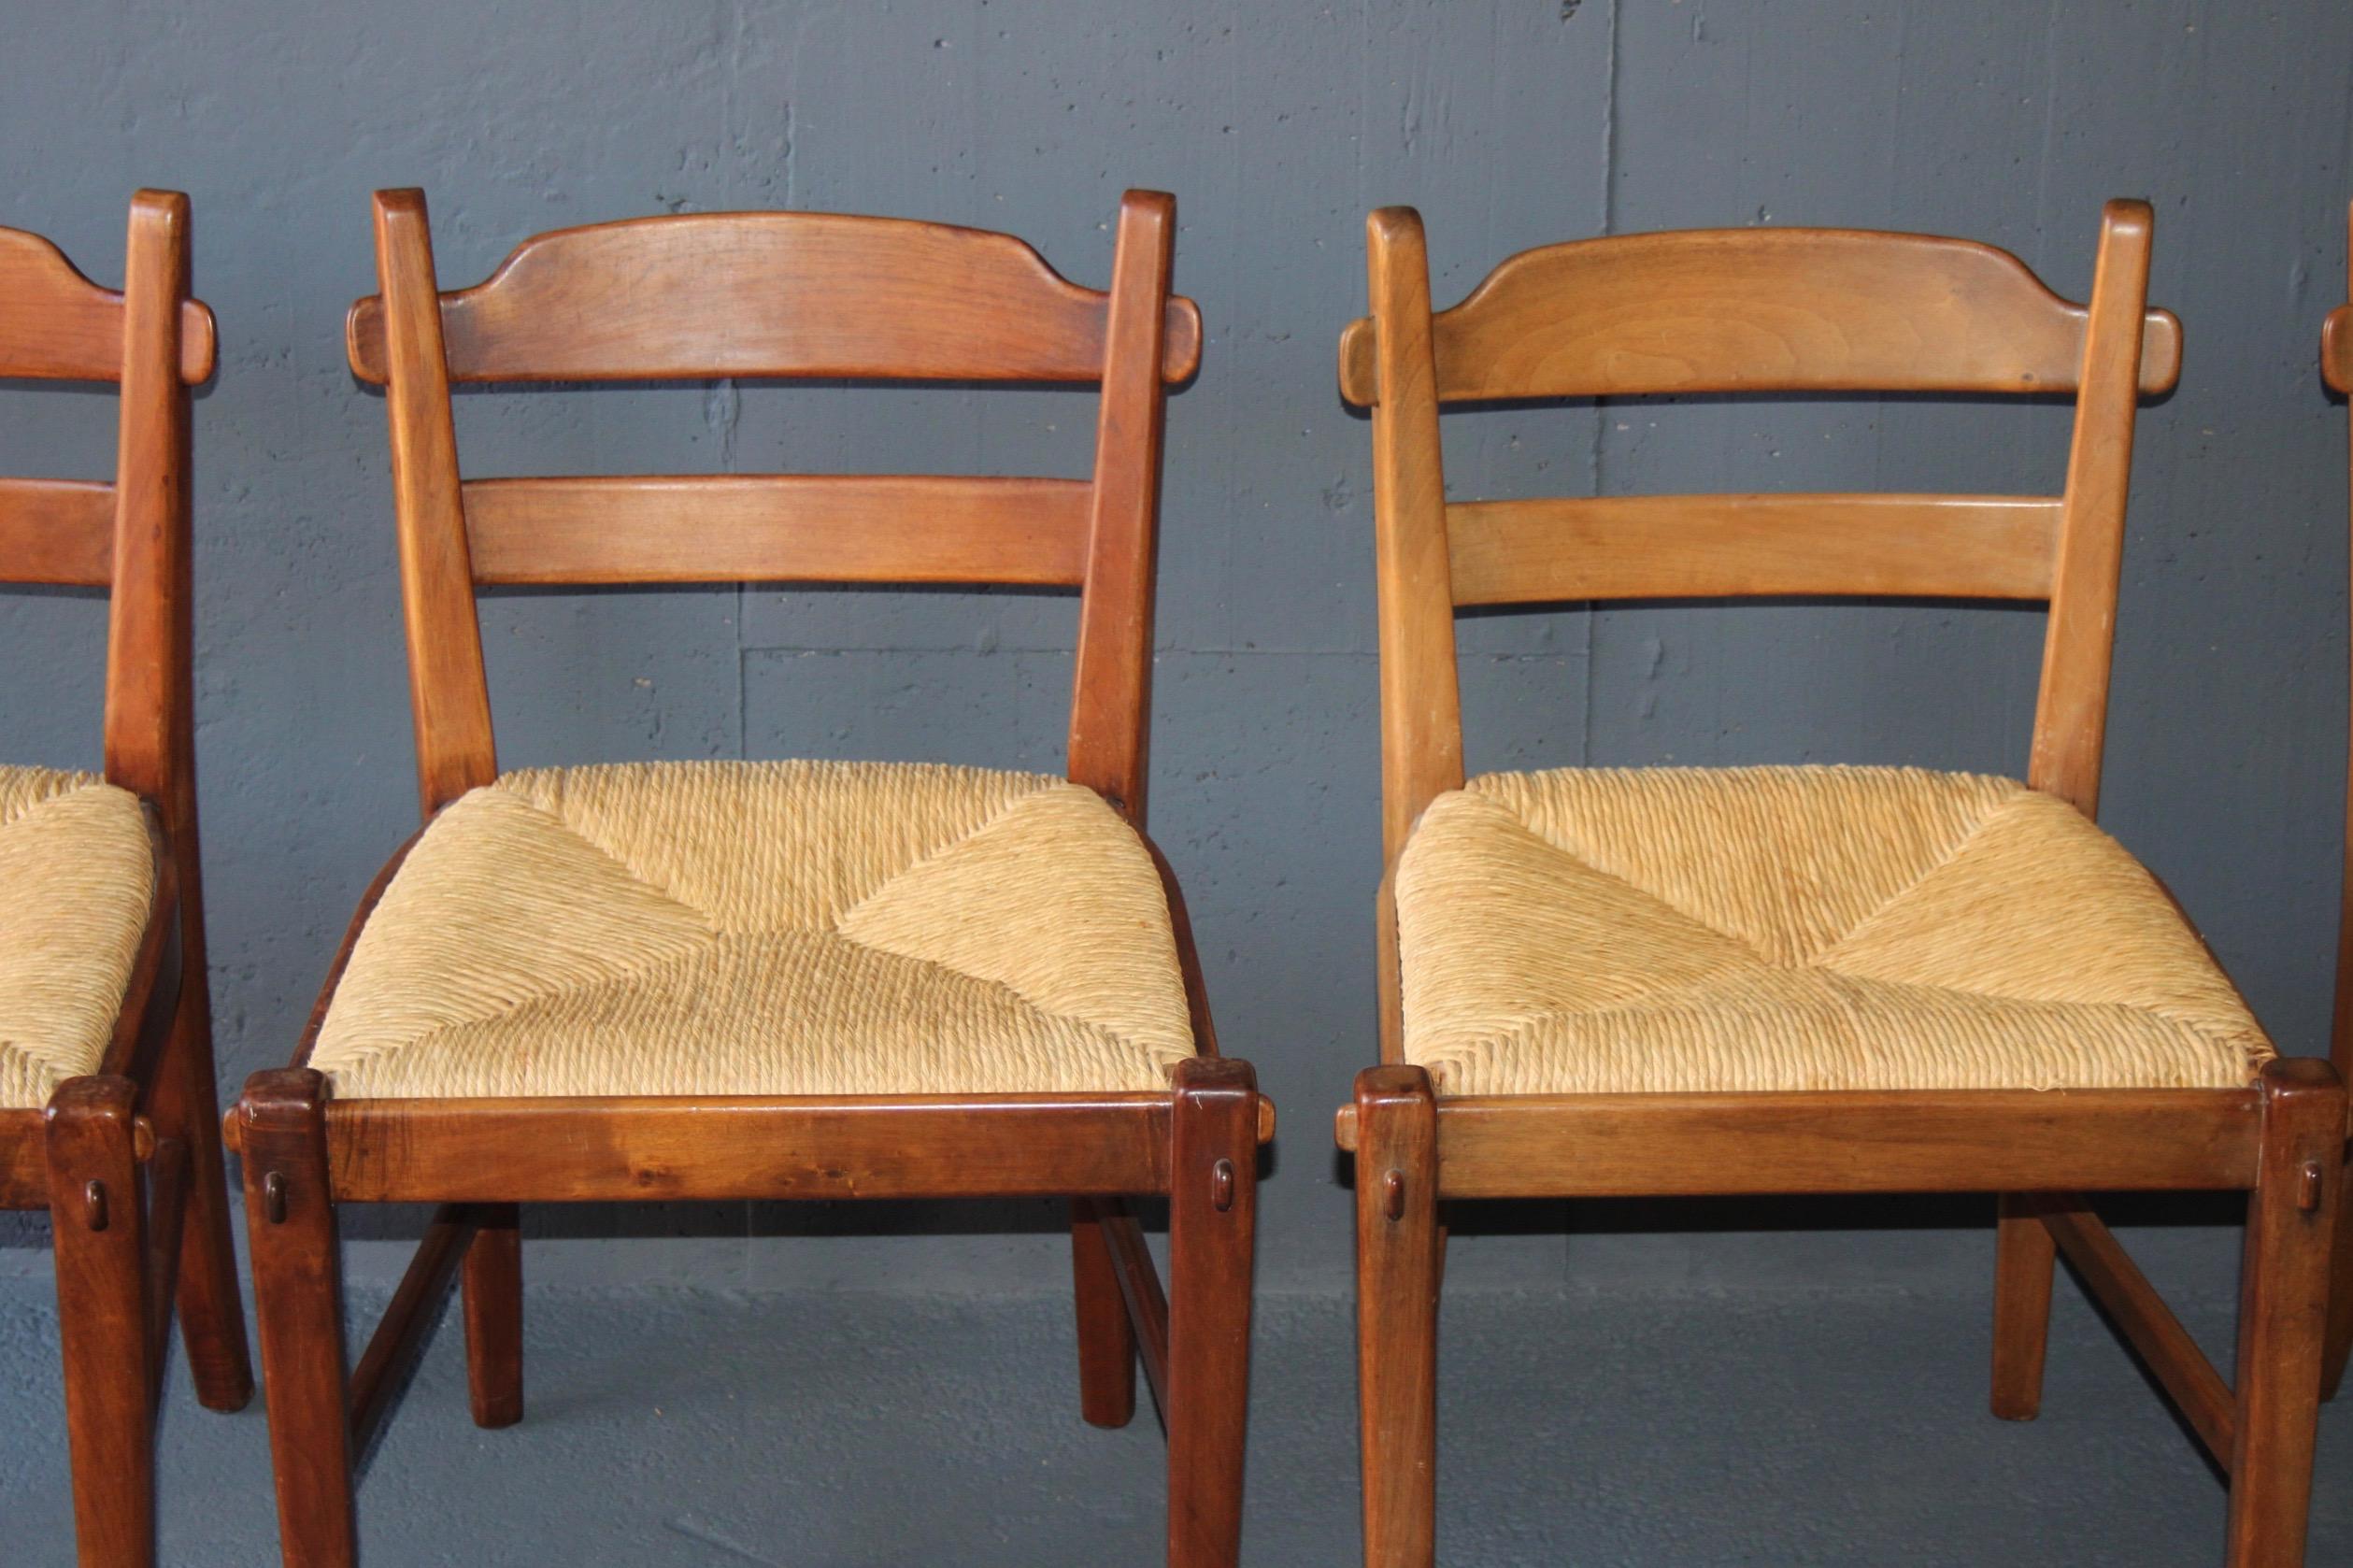 Set of 4 Franz Xavier Sproll style chairs.